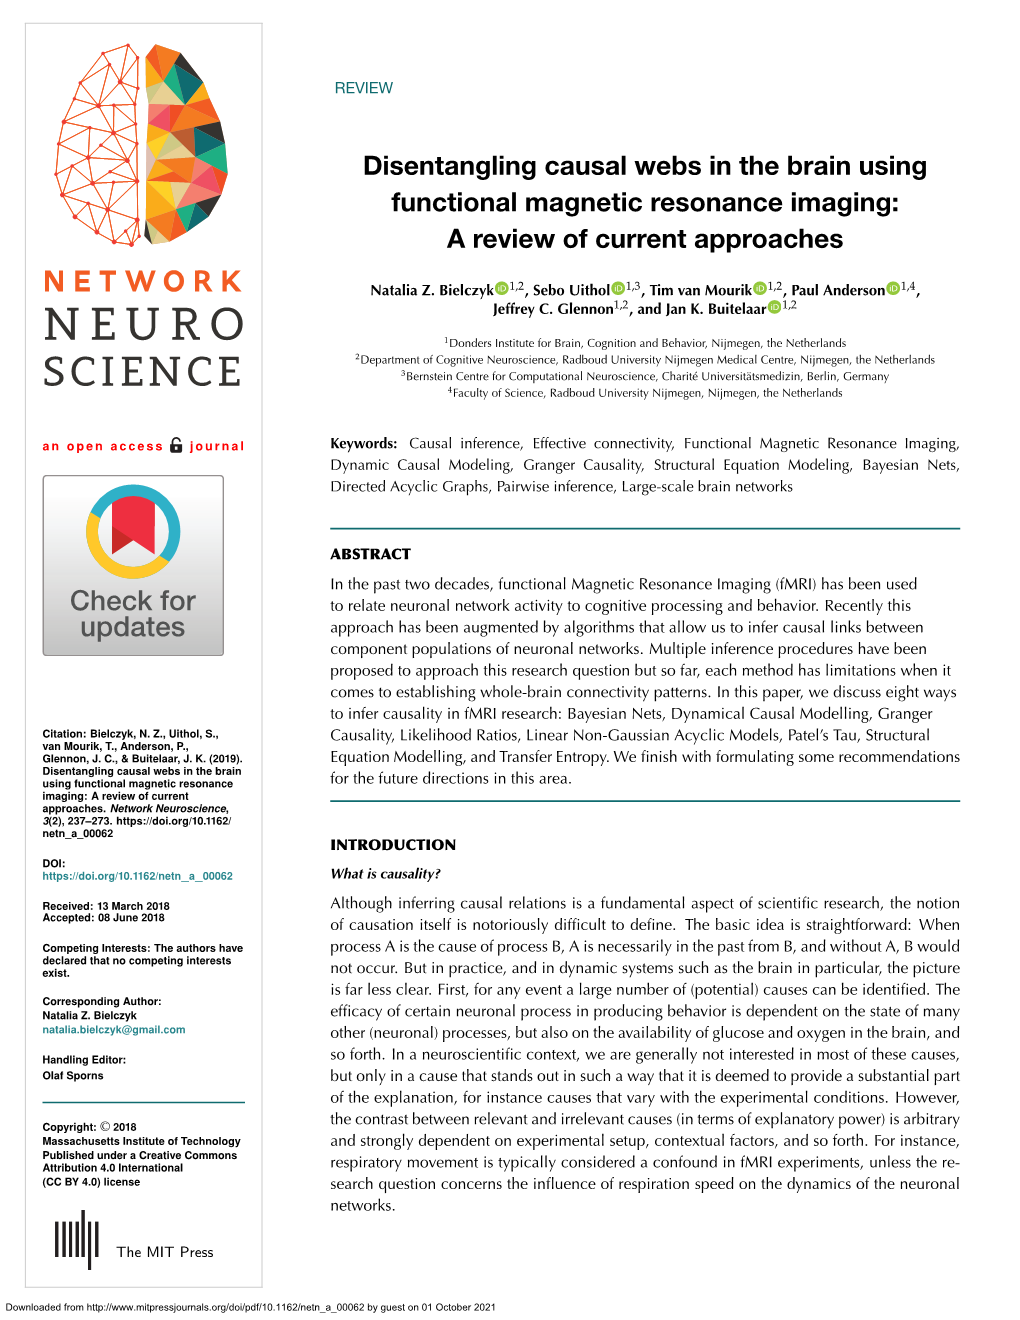 Disentangling Causal Webs in the Brain Using Functional Magnetic Resonance Imaging: a Review of Current Approaches